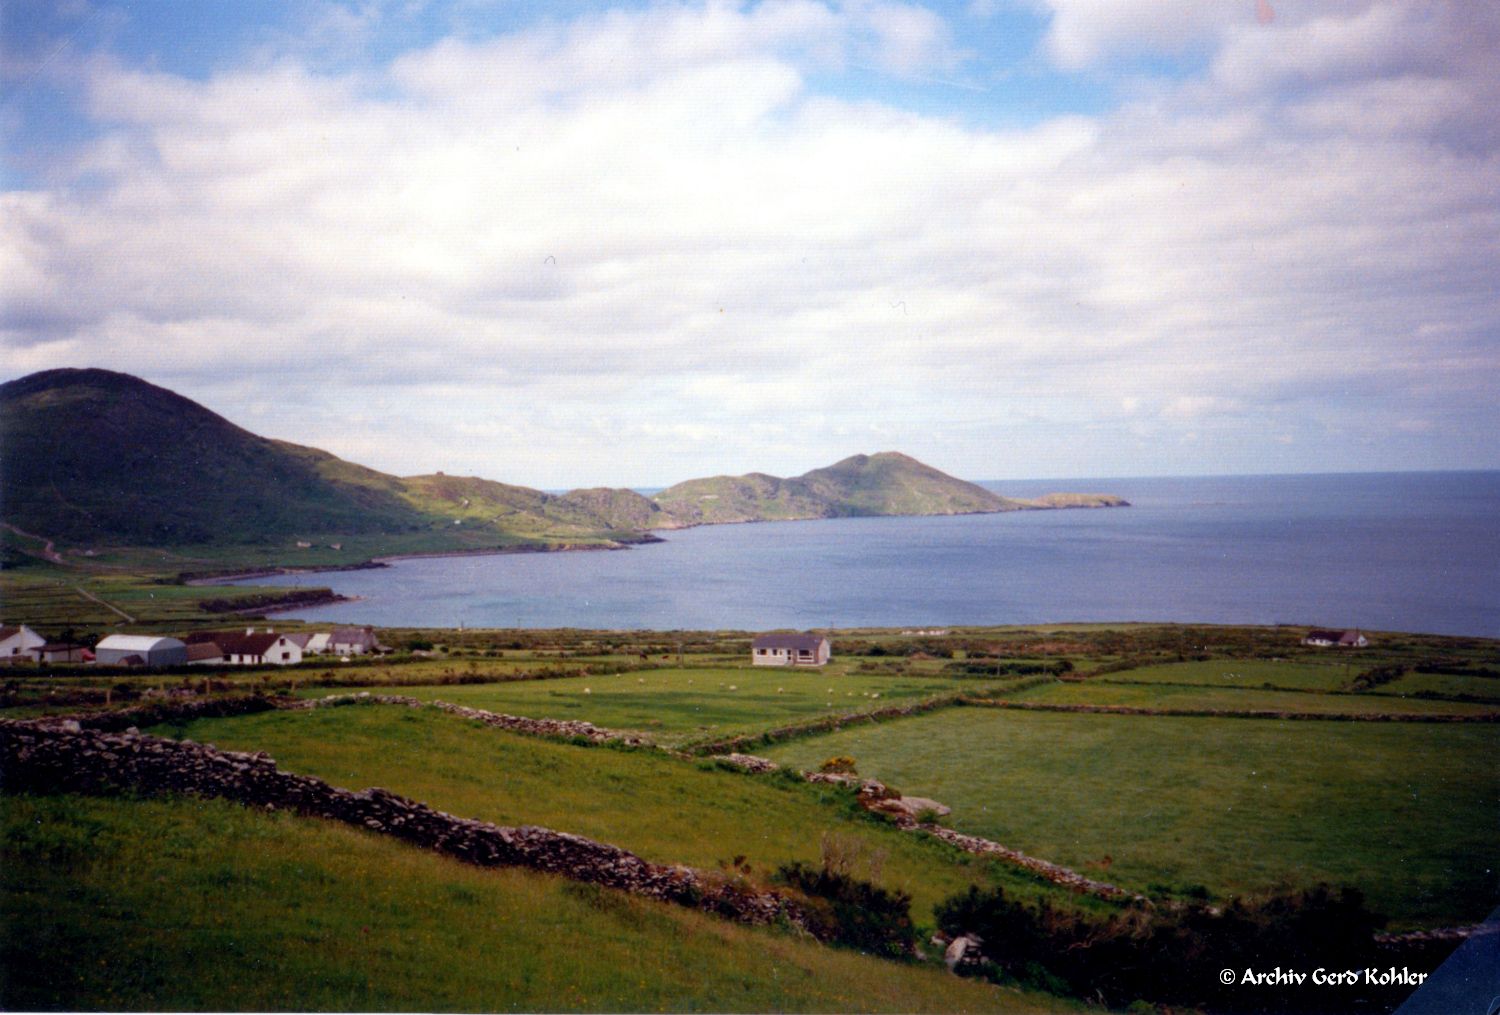 Ring of Kerry 1989